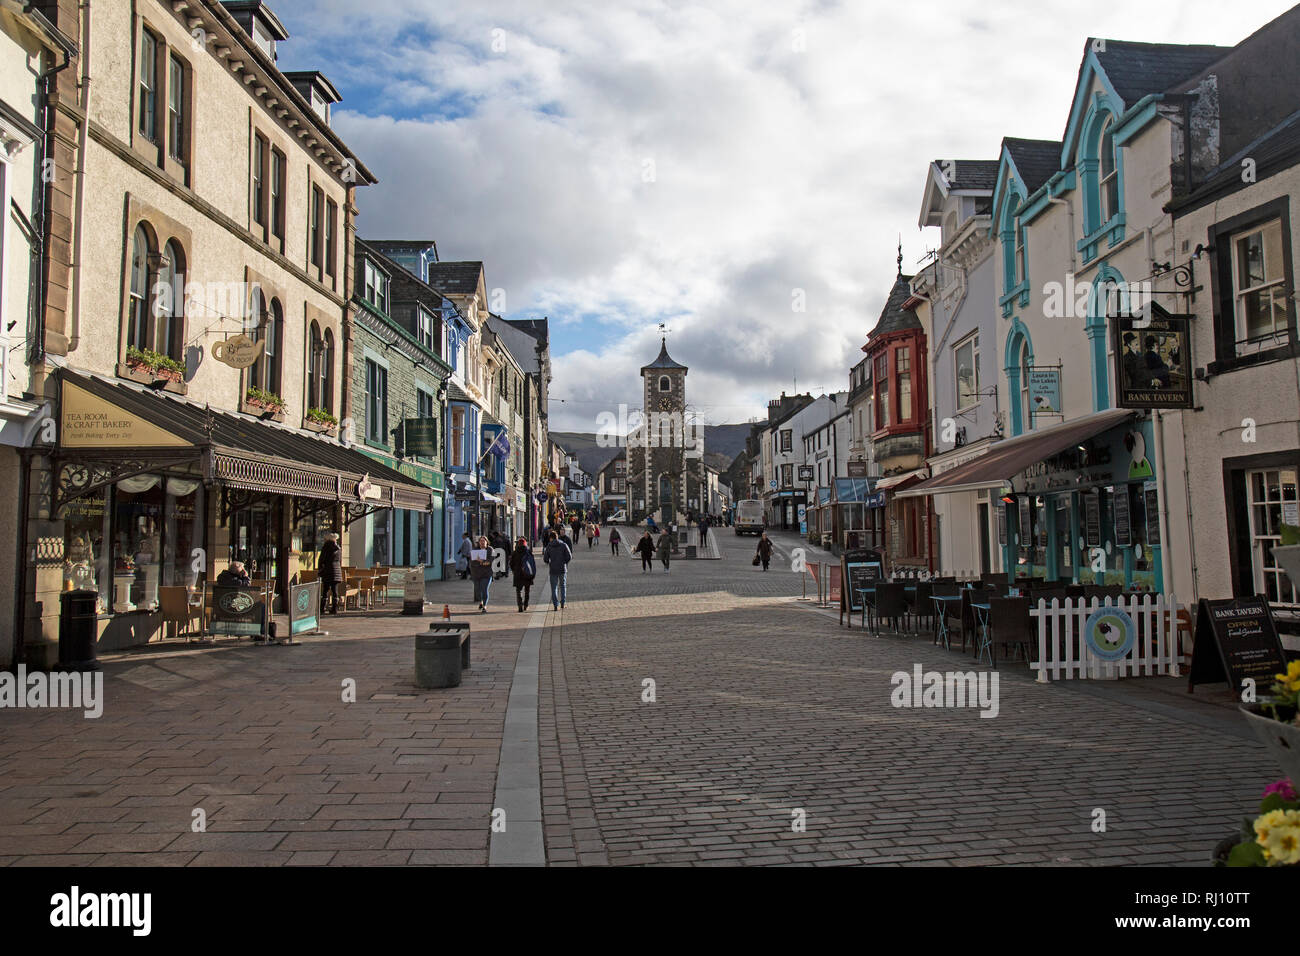 Main Street in Keswick, a town in the Lake District National Park in Cumbria, England. Shops, bars, pubs and restaurants all visible. Stock Photo